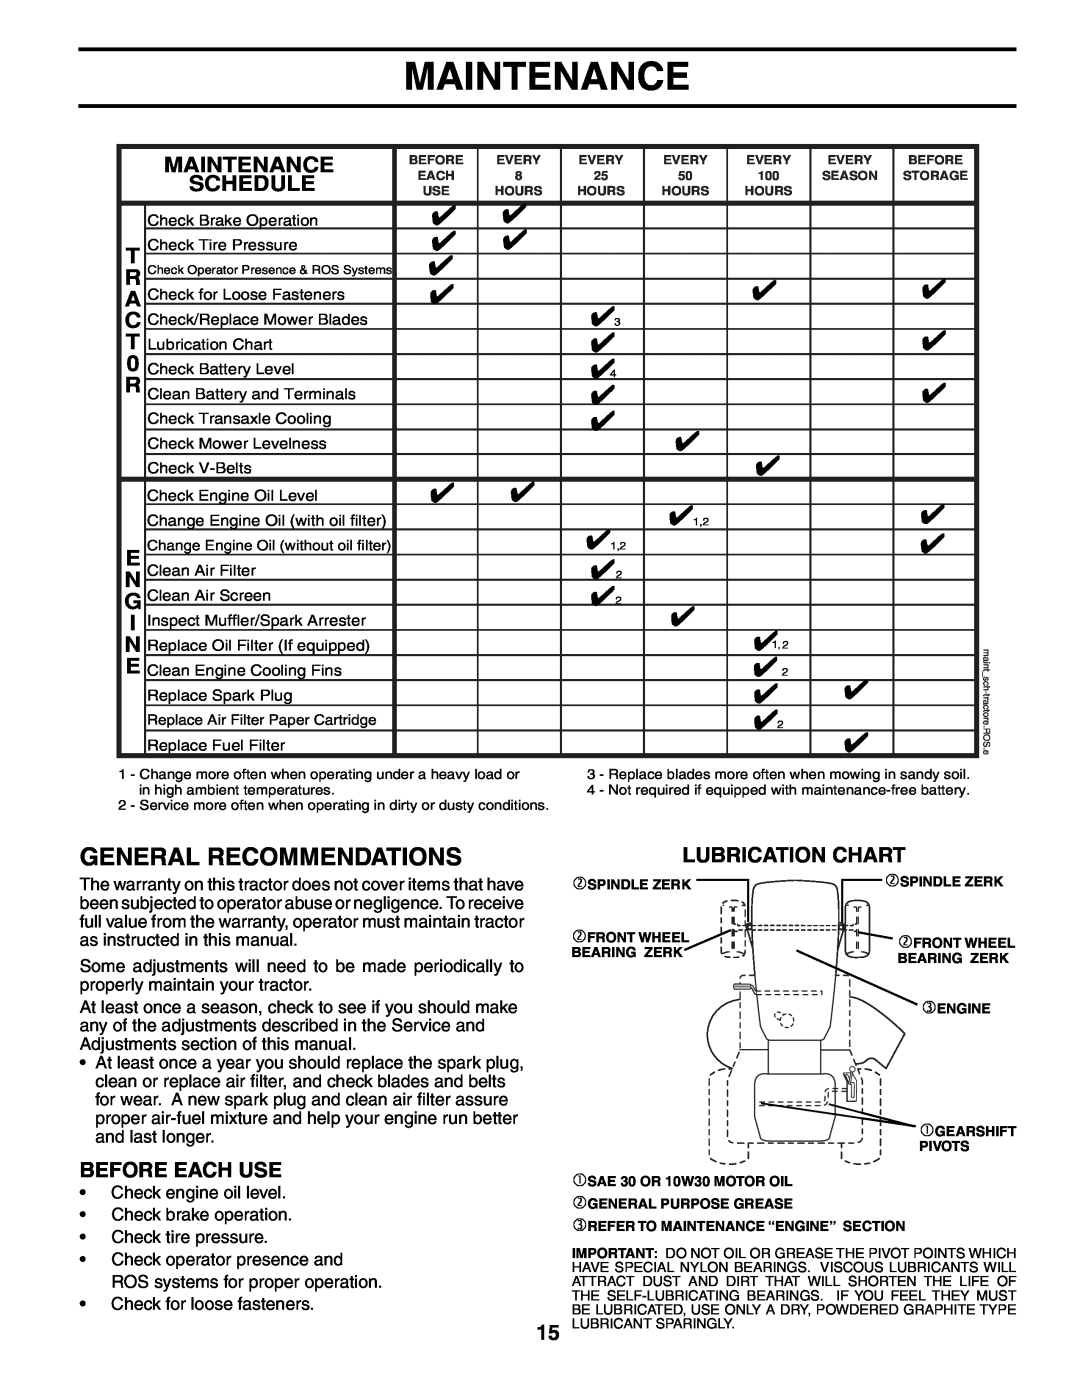 Weed Eater HD13538 manual Maintenance, General Recommendations, Schedule, Before Each Use, Lubrication Chart 